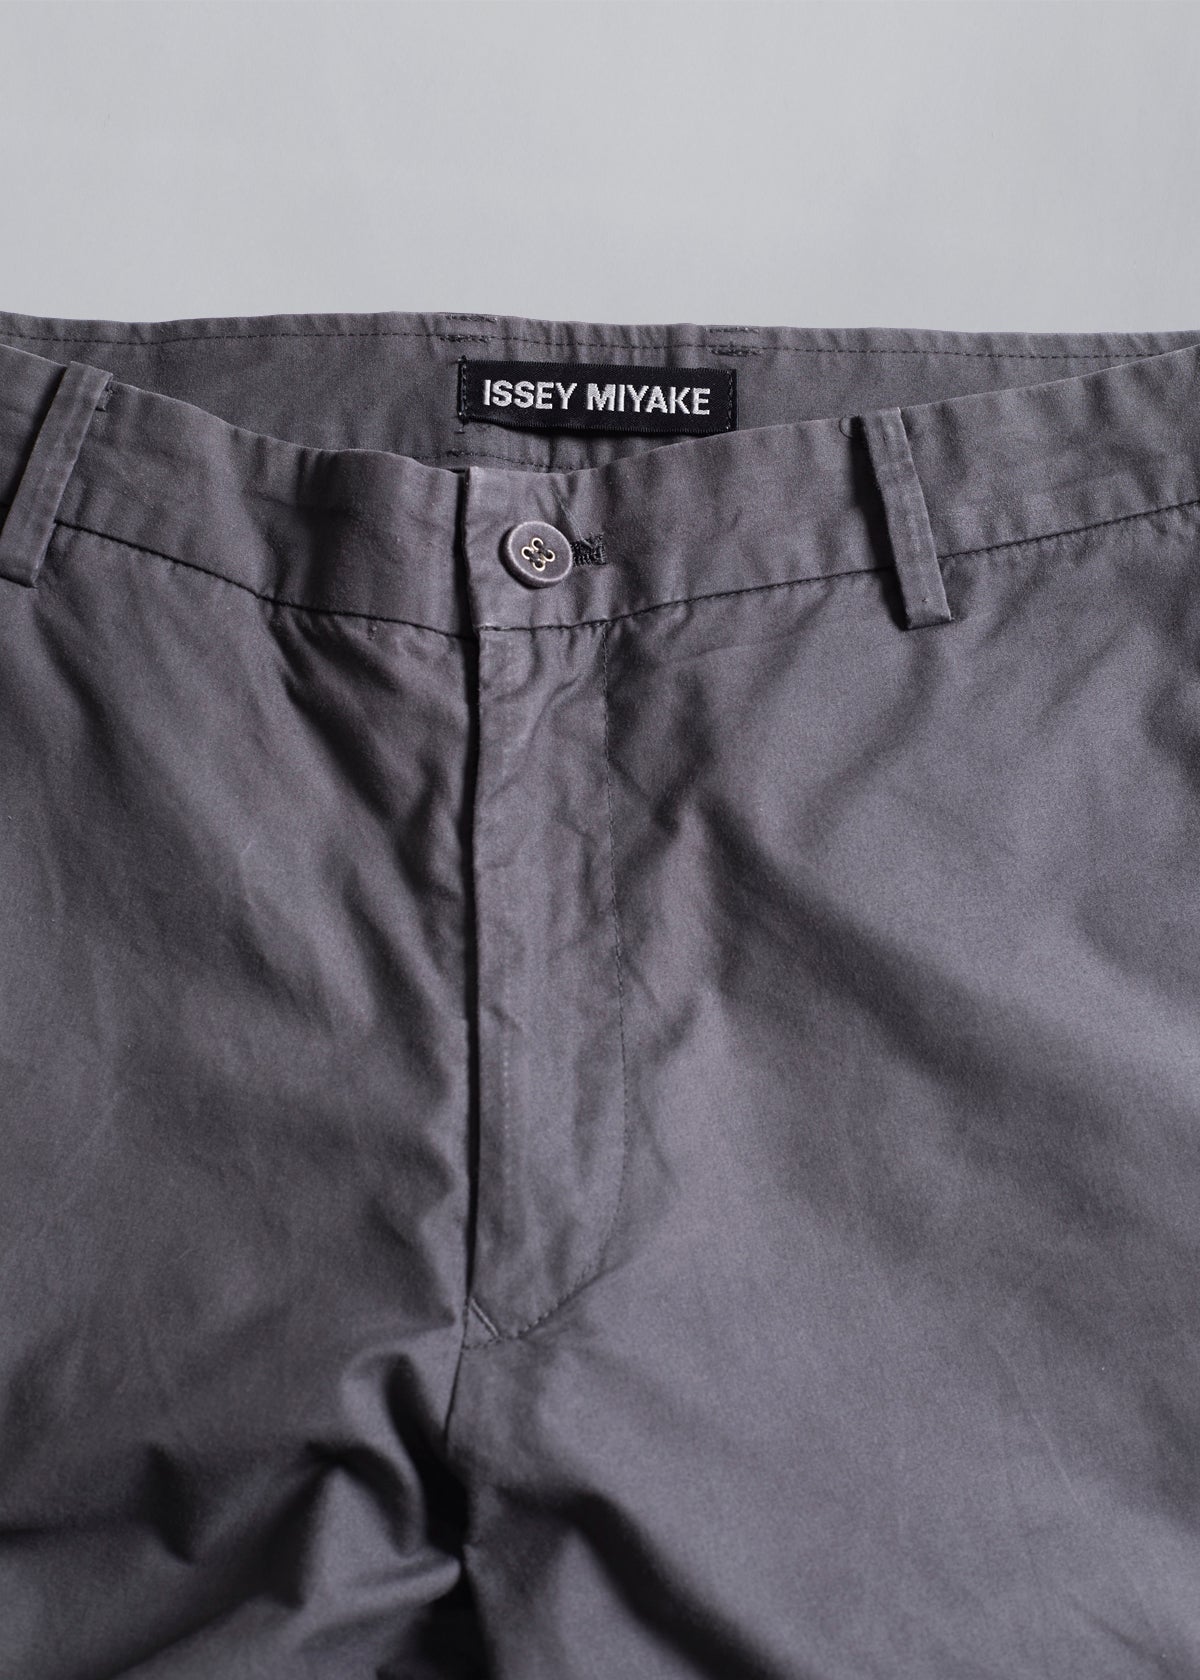 Light Cotton Cropped Pants AW2001 - Small - The Archivist Store